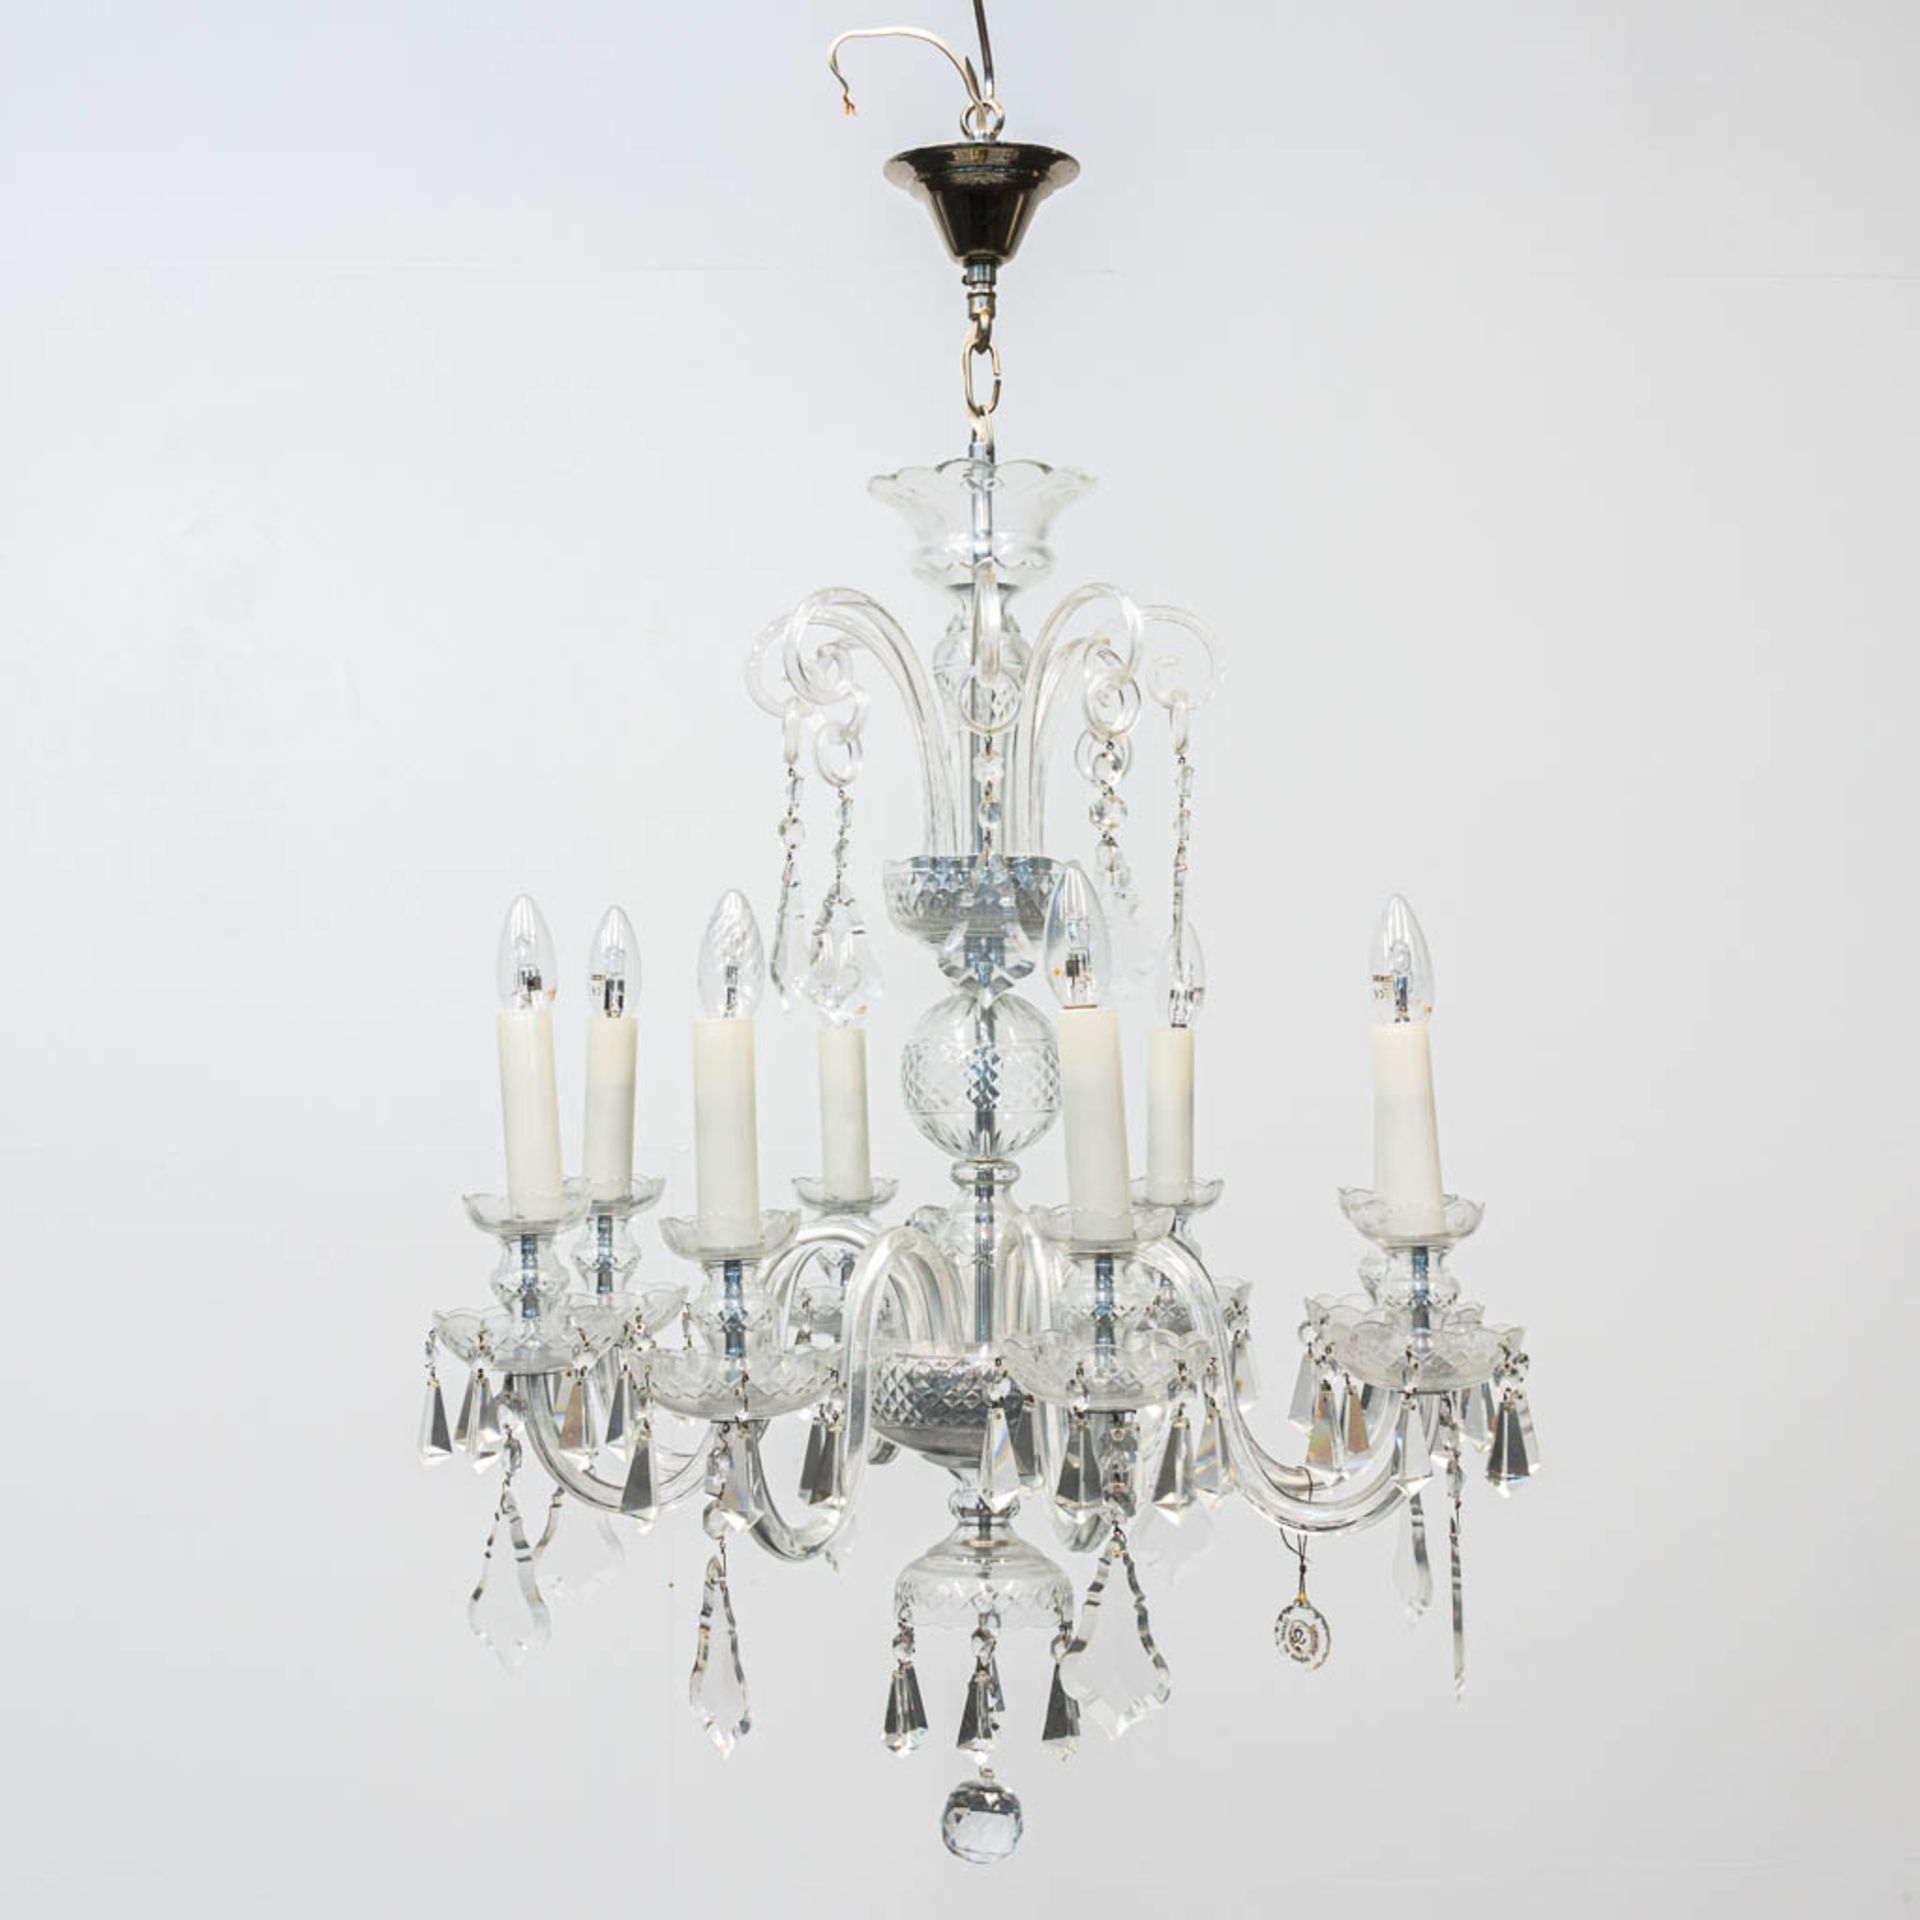 A Chandelier made of Boheme glass - Image 7 of 7